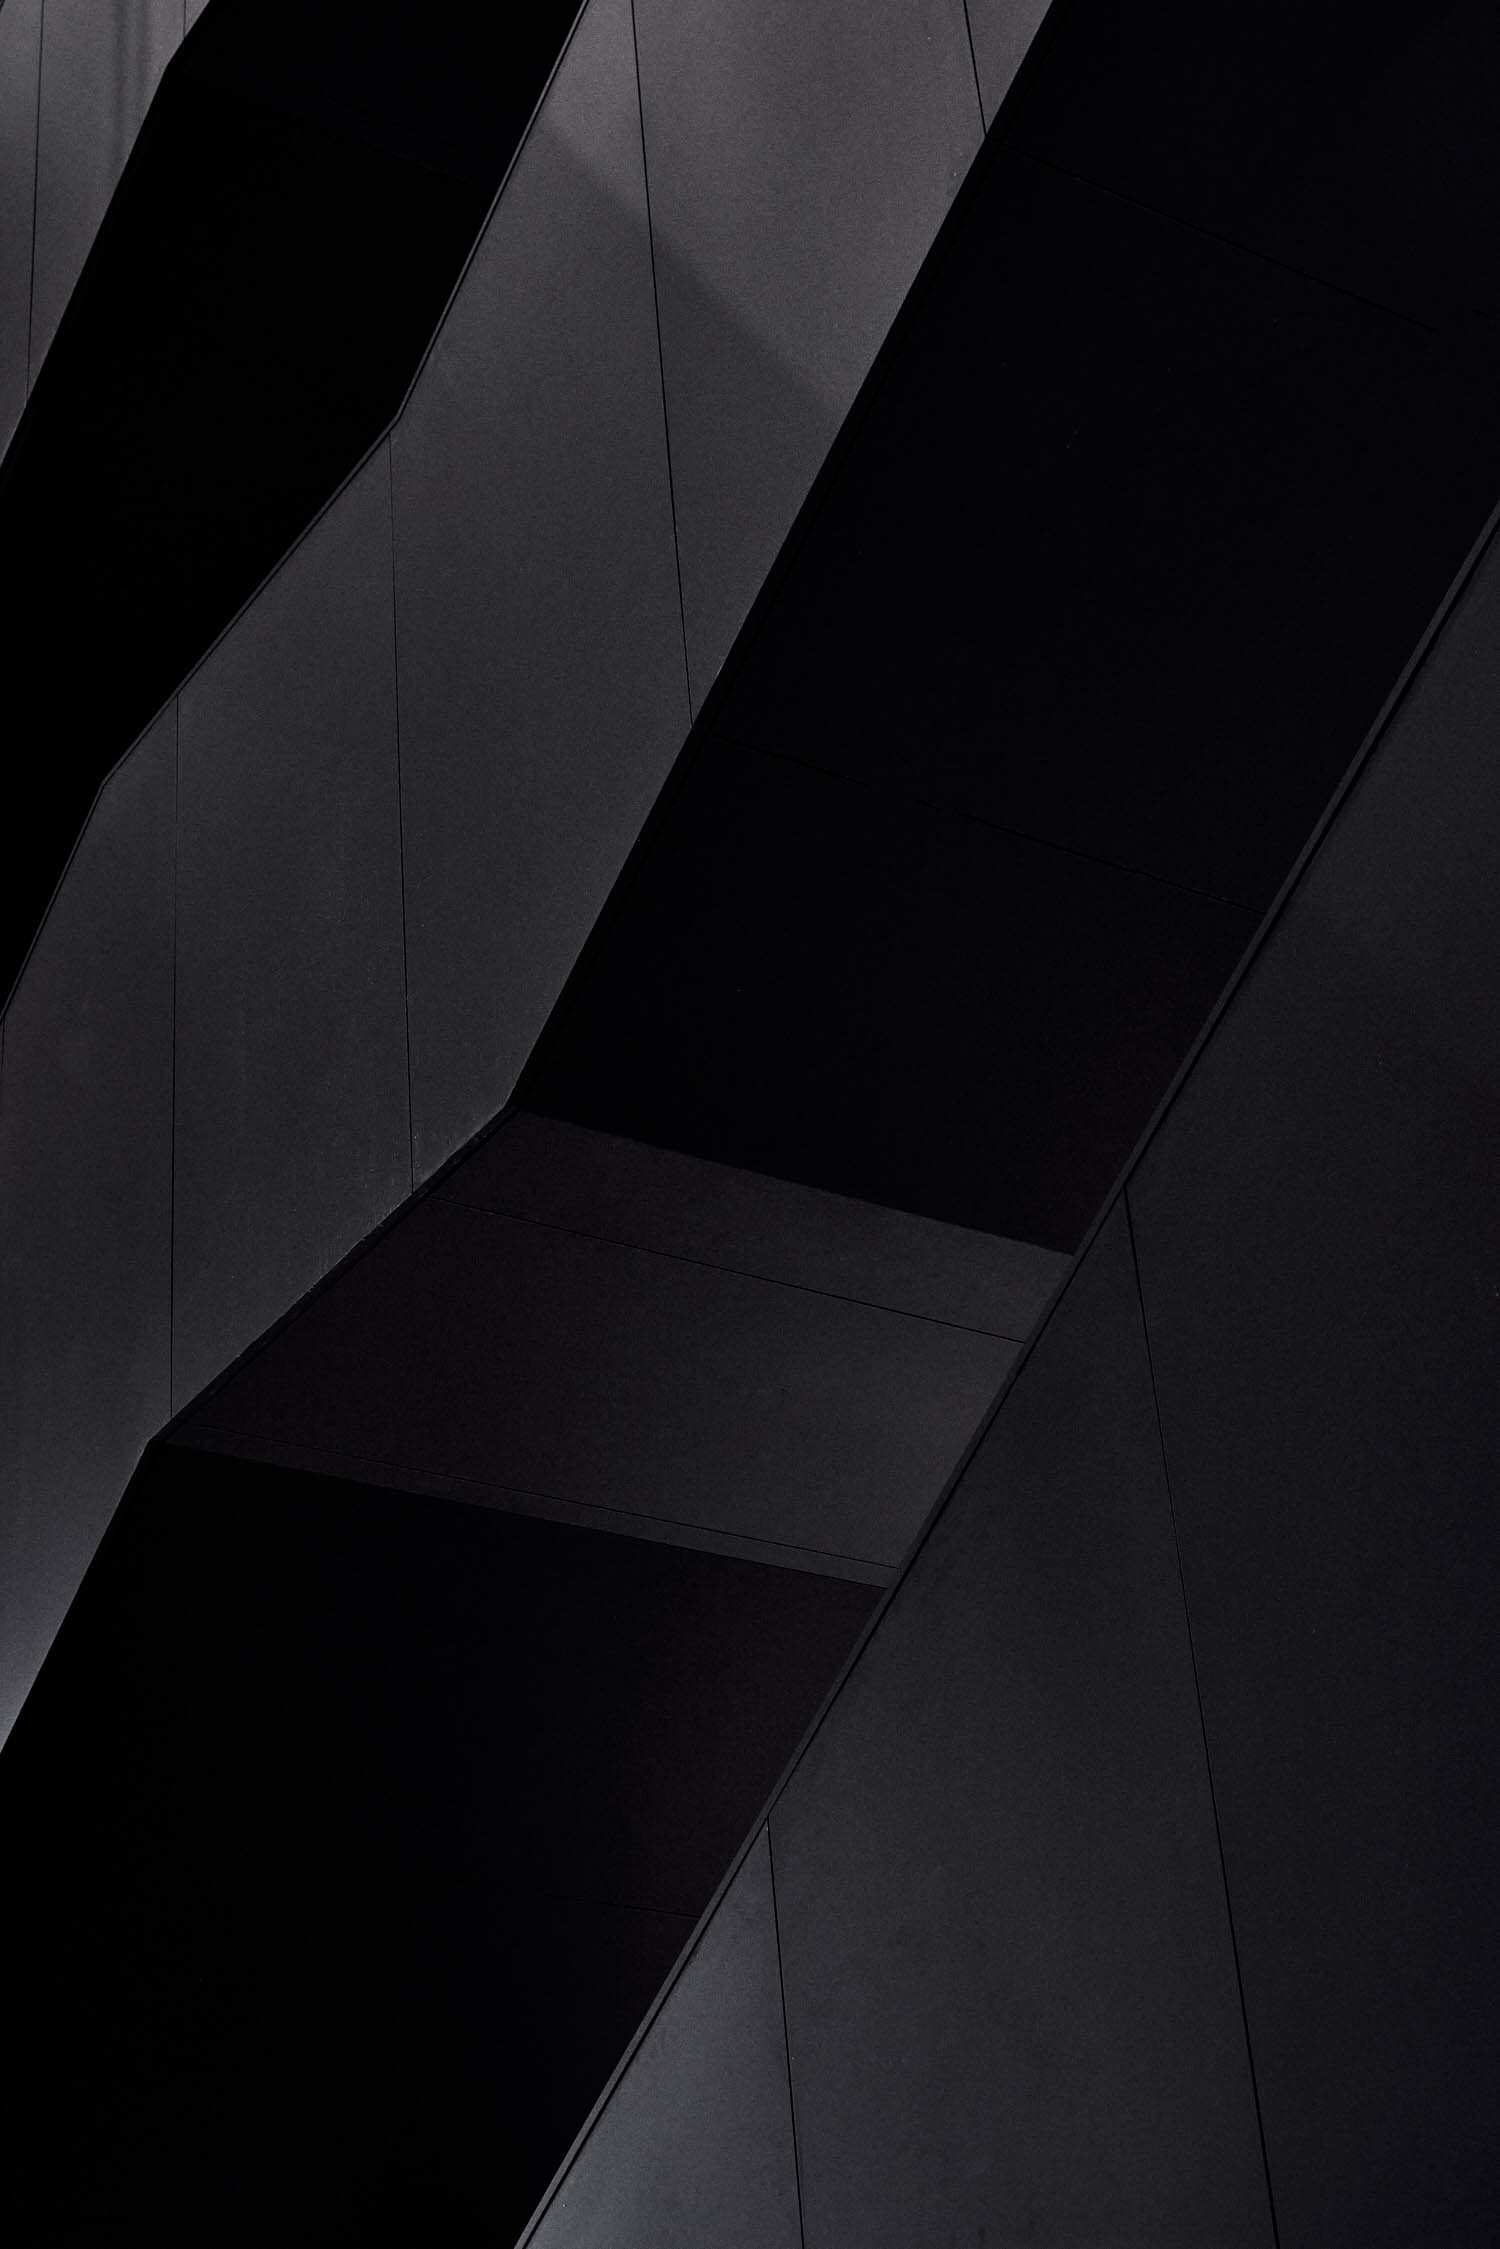 The staircase is made of ultra-matte black laminate.